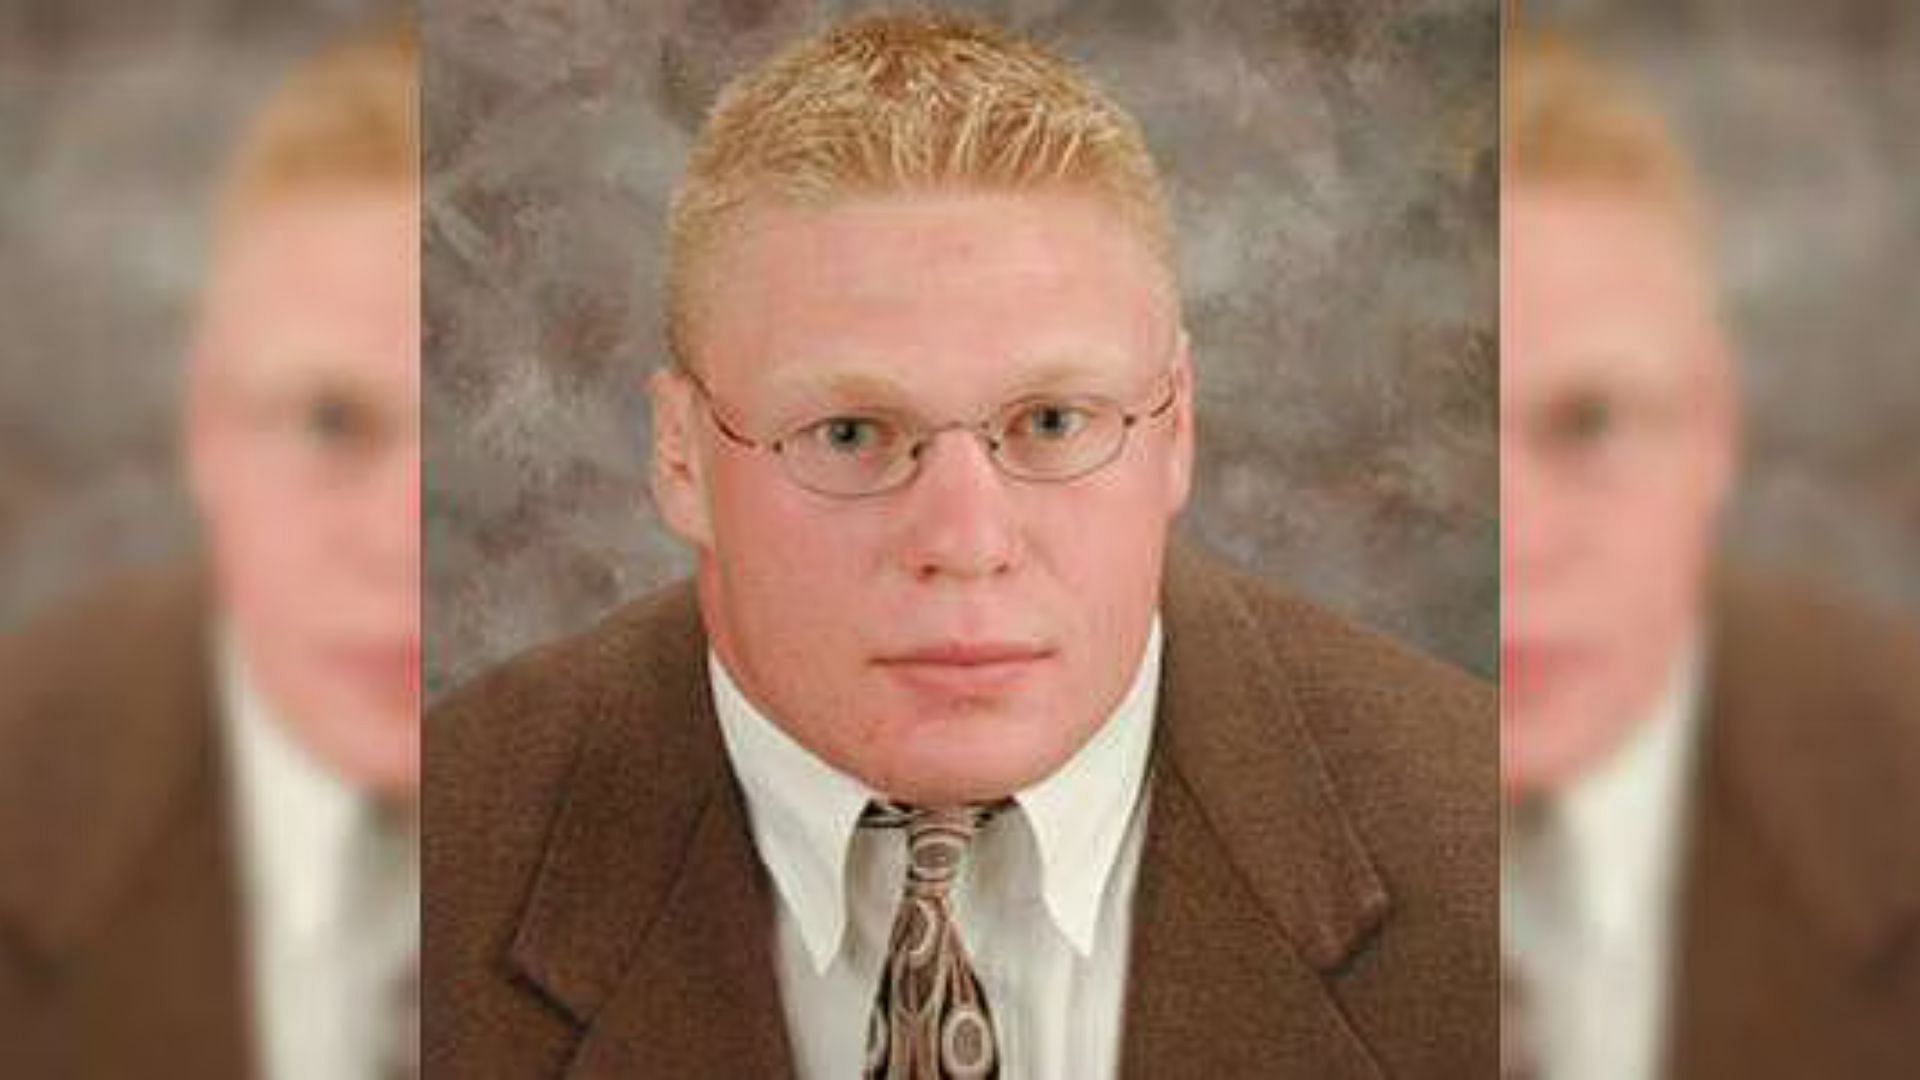 The famous image of Brock Lesnar that turned into a meme